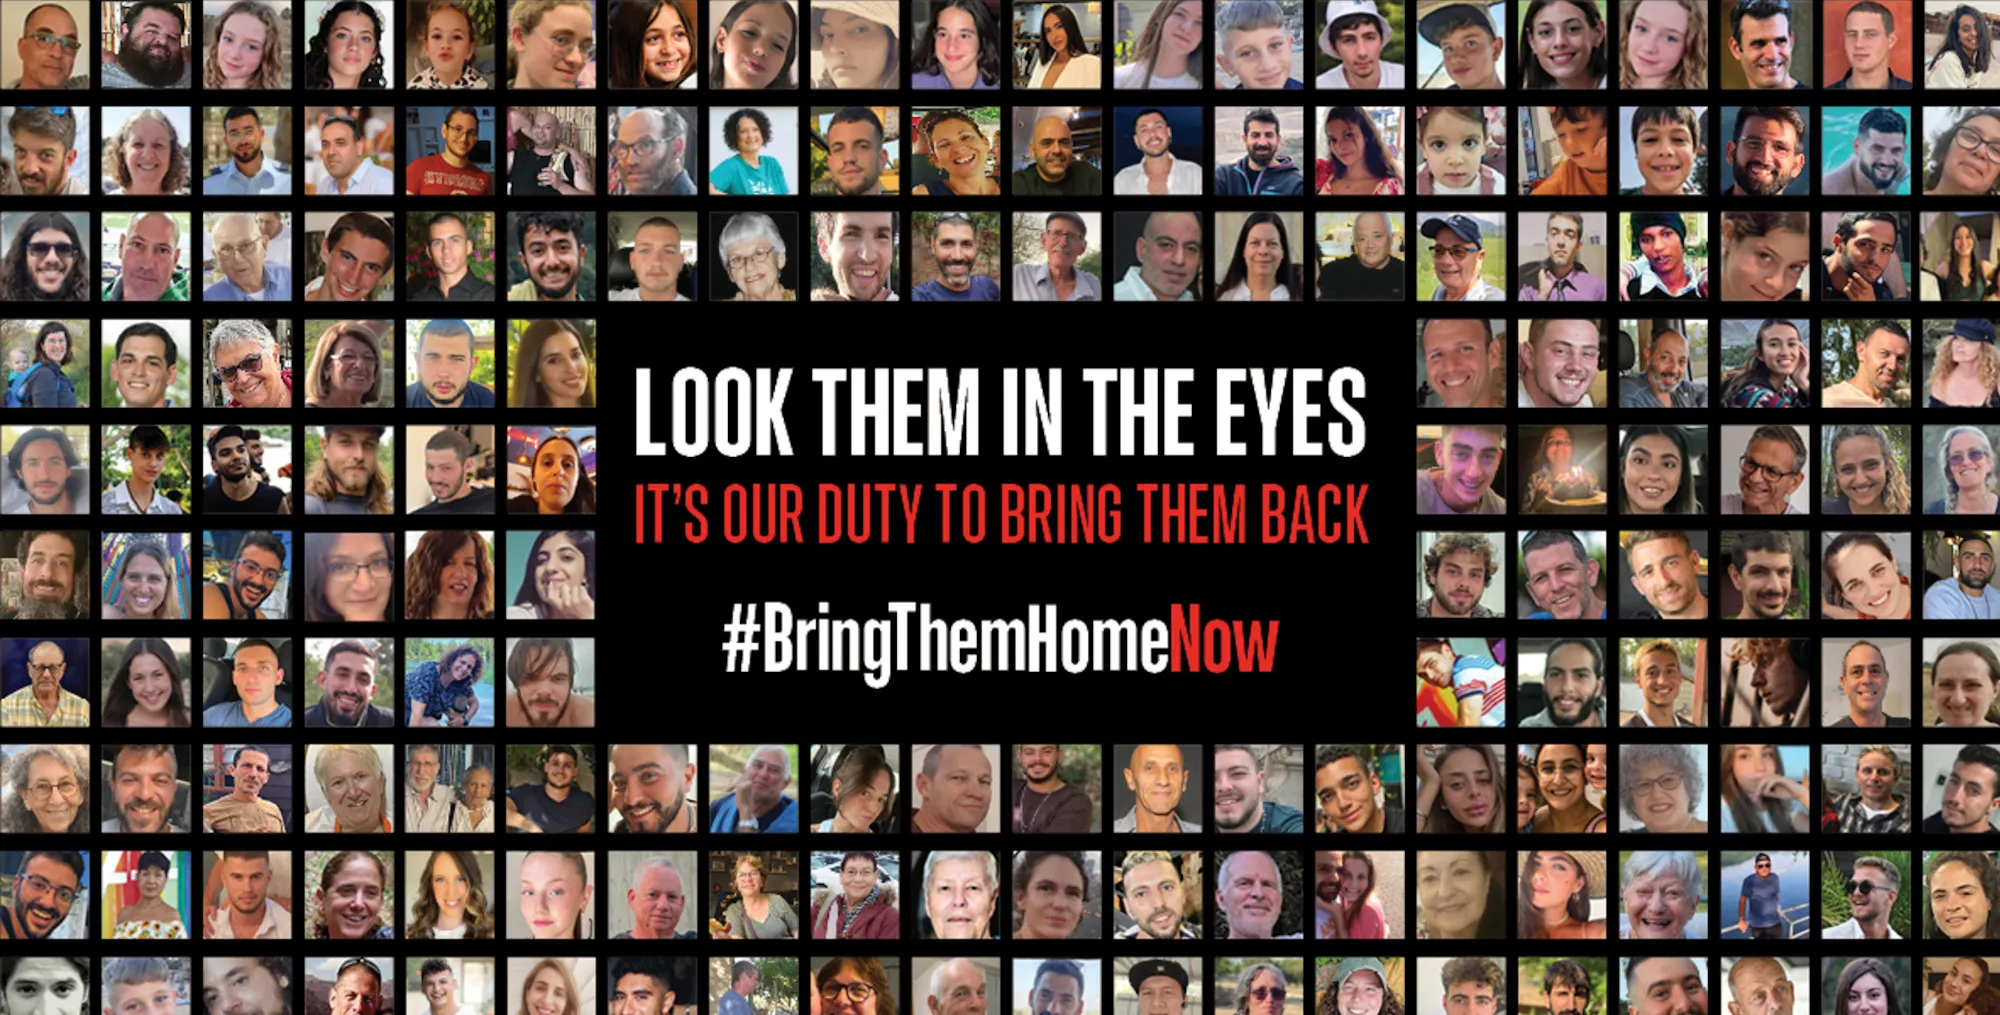 Look them in the eyes! – Bring them home now!